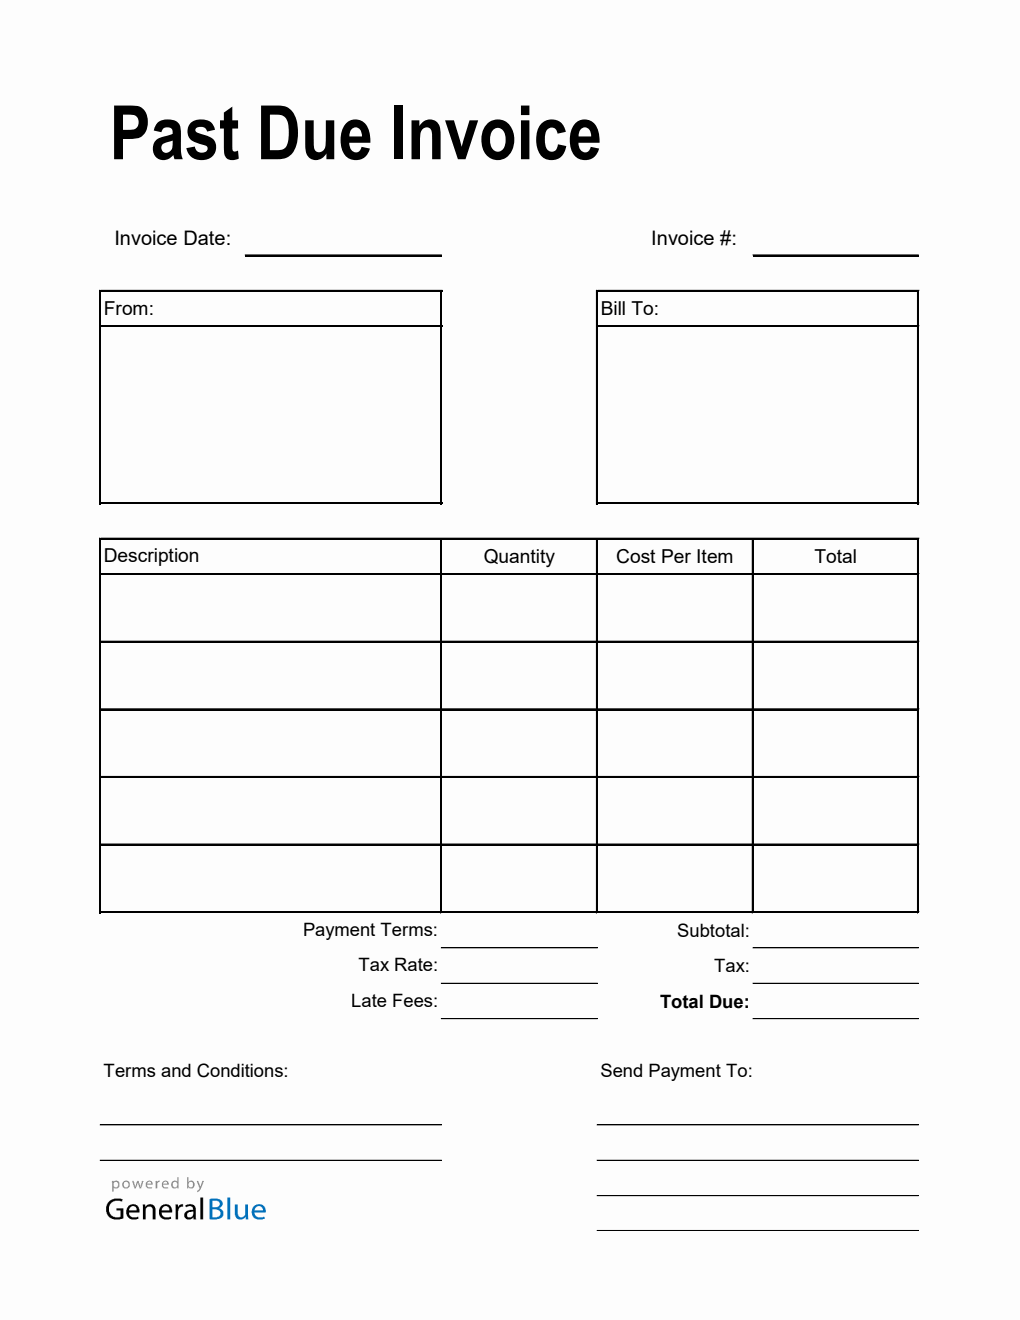 Past Due Invoice in Excel (Printable)